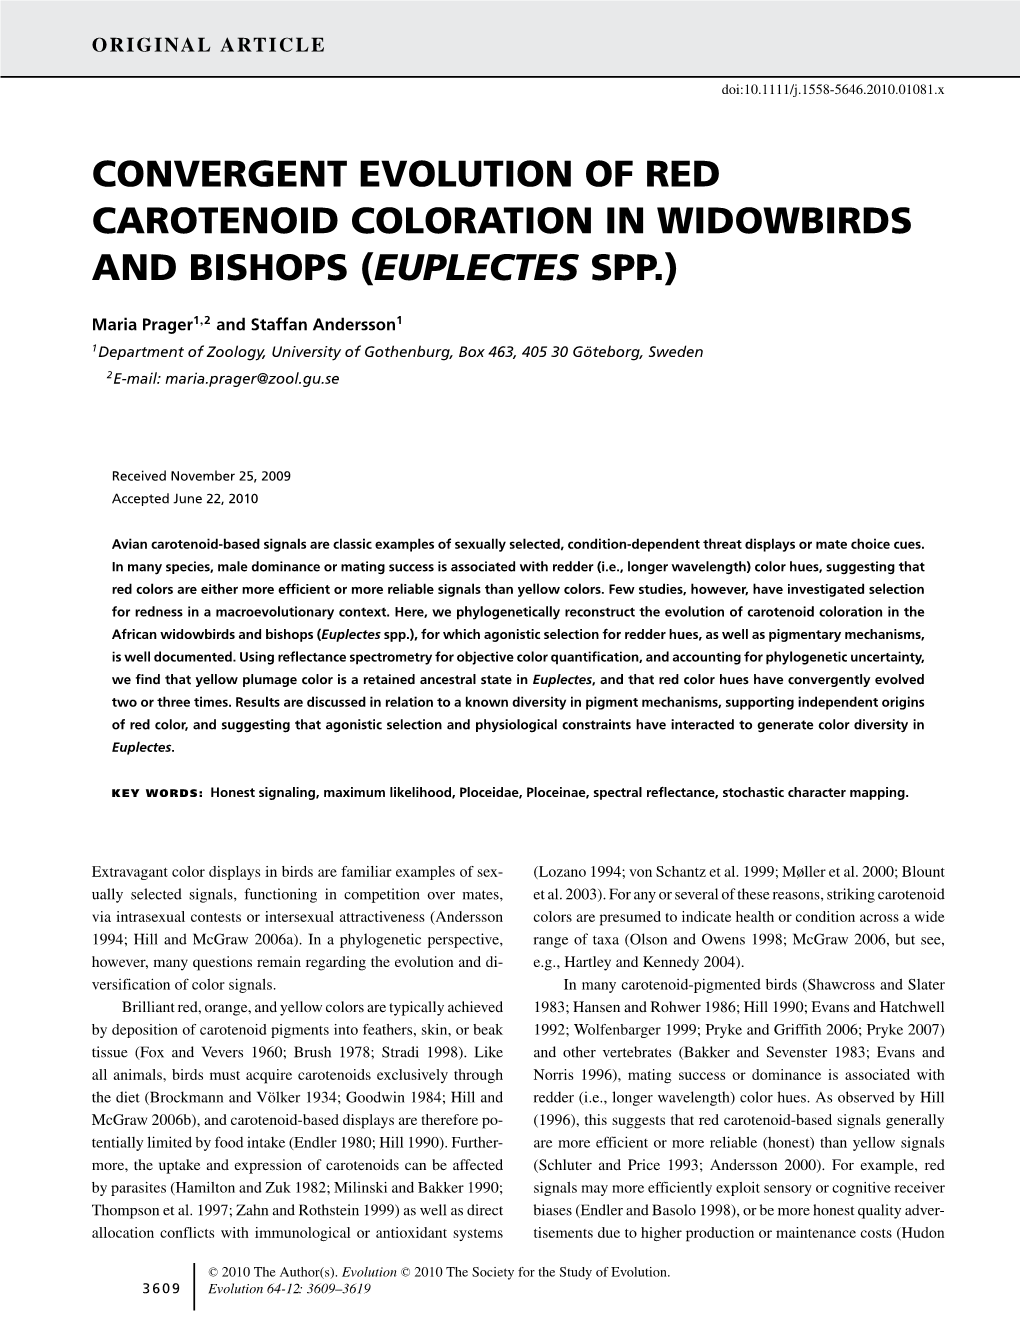 Convergent Evolution of Red Carotenoid Coloration in Widowbirds and Bishops (Euplectes Spp.)